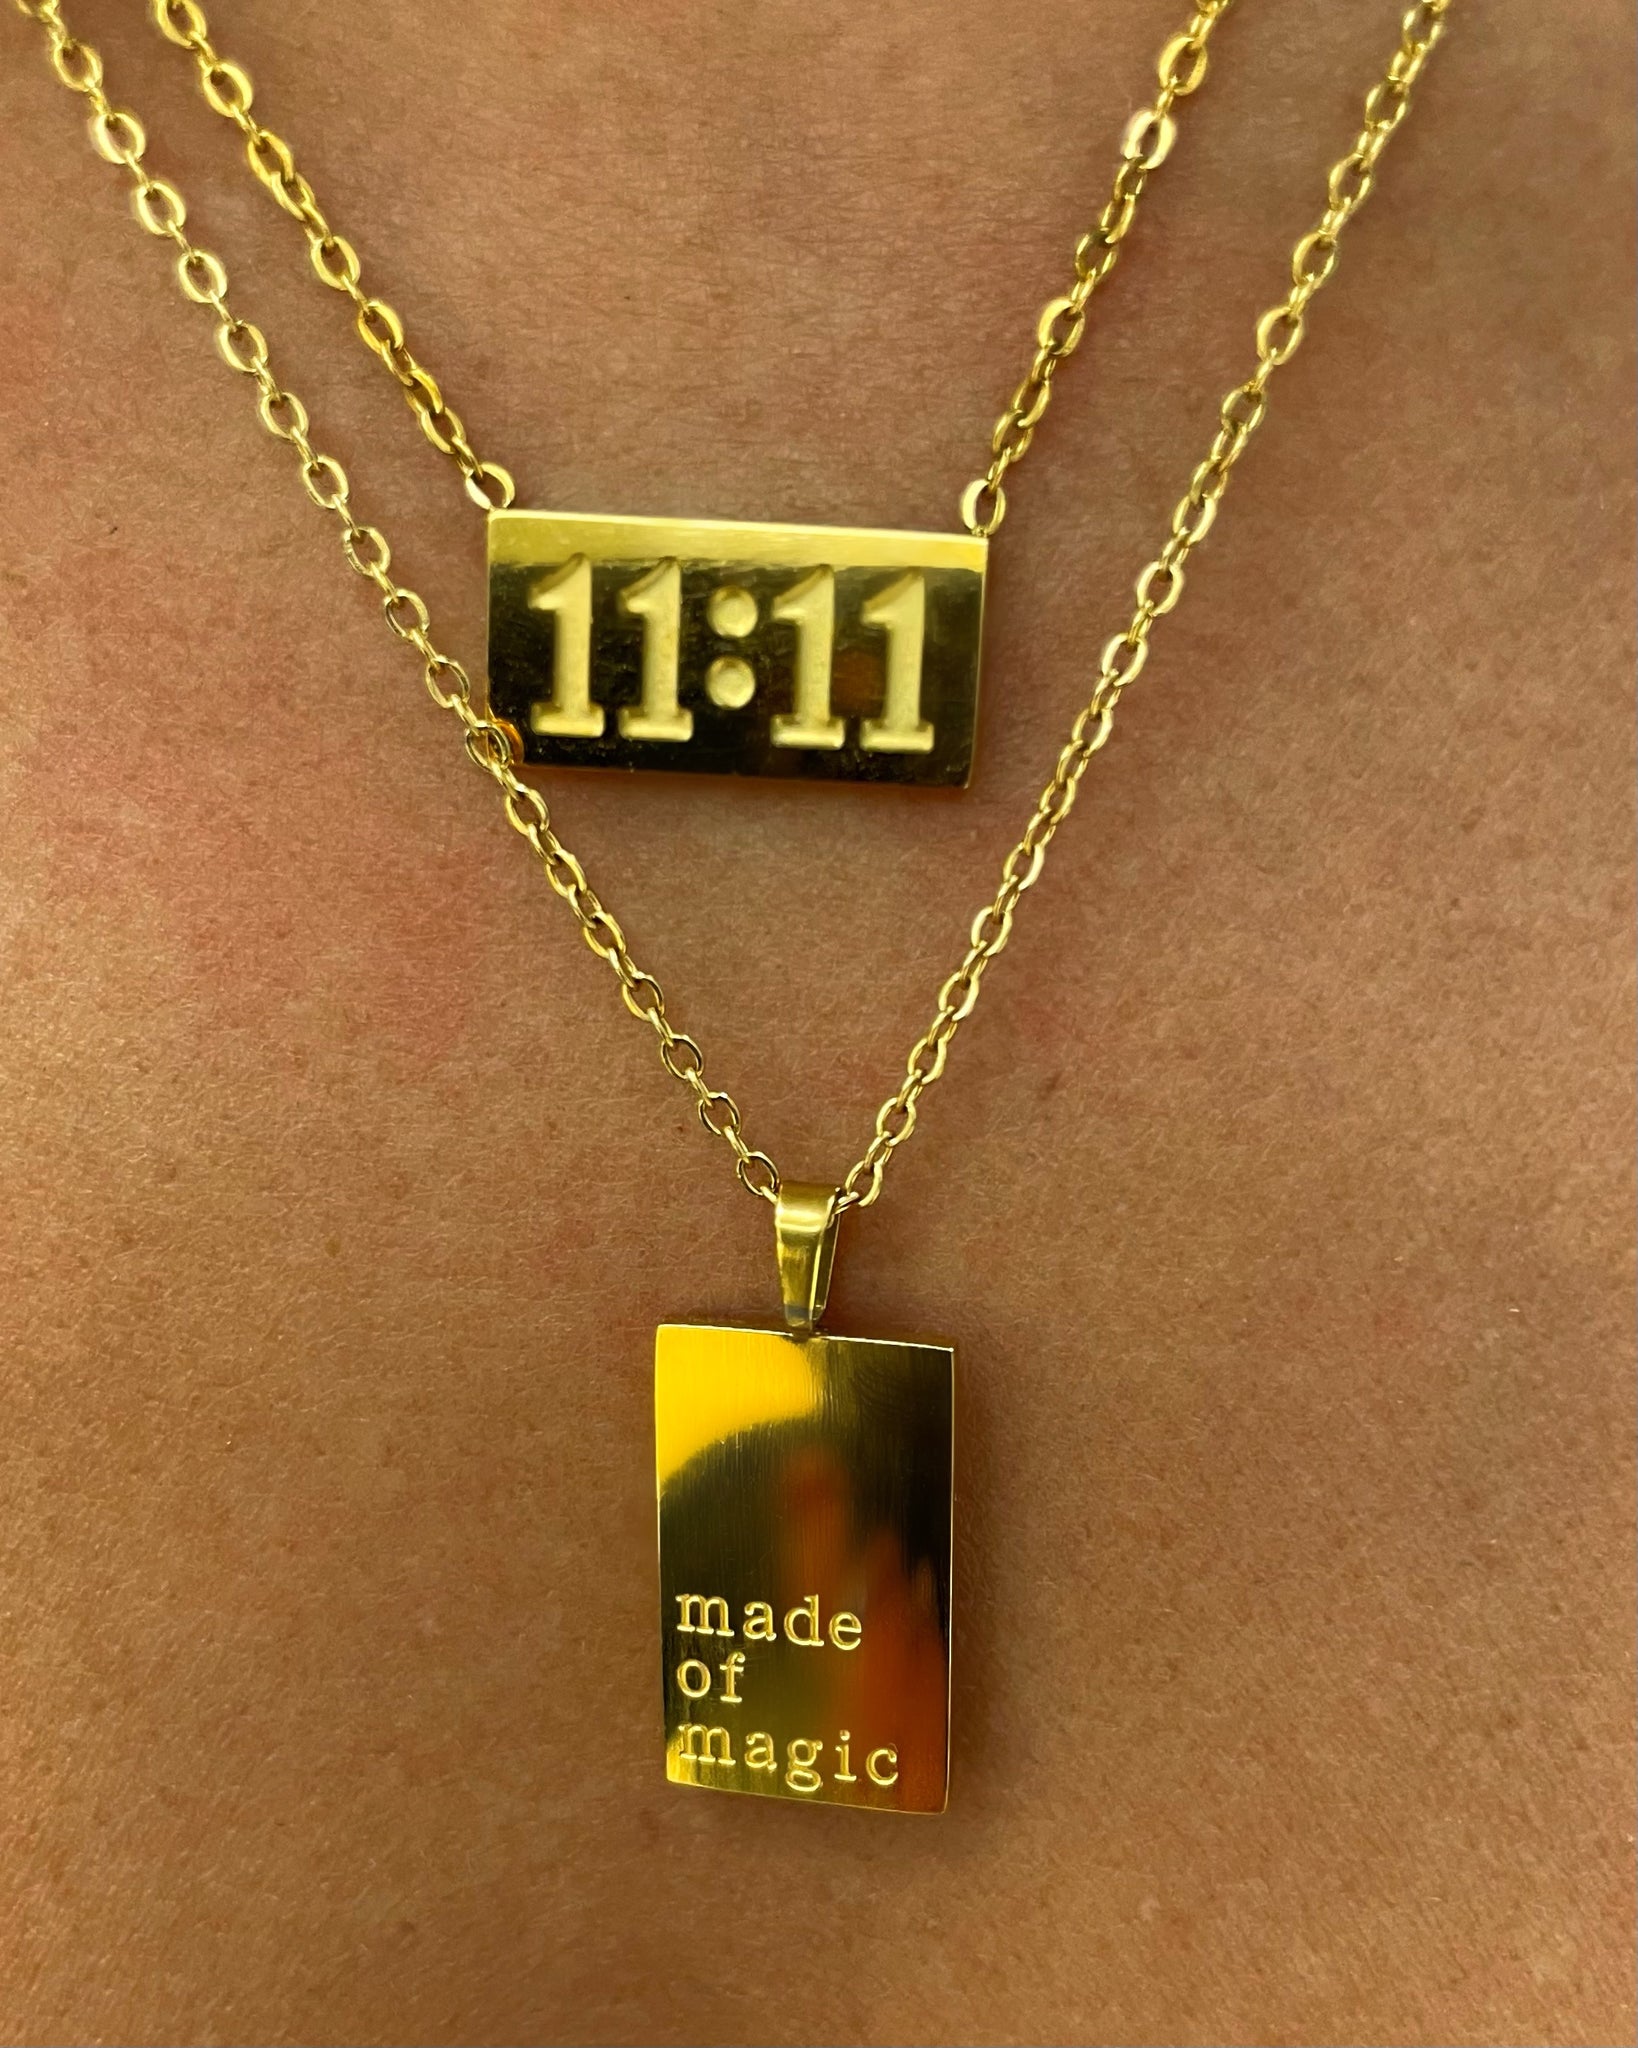 11:11 Necklace {view}